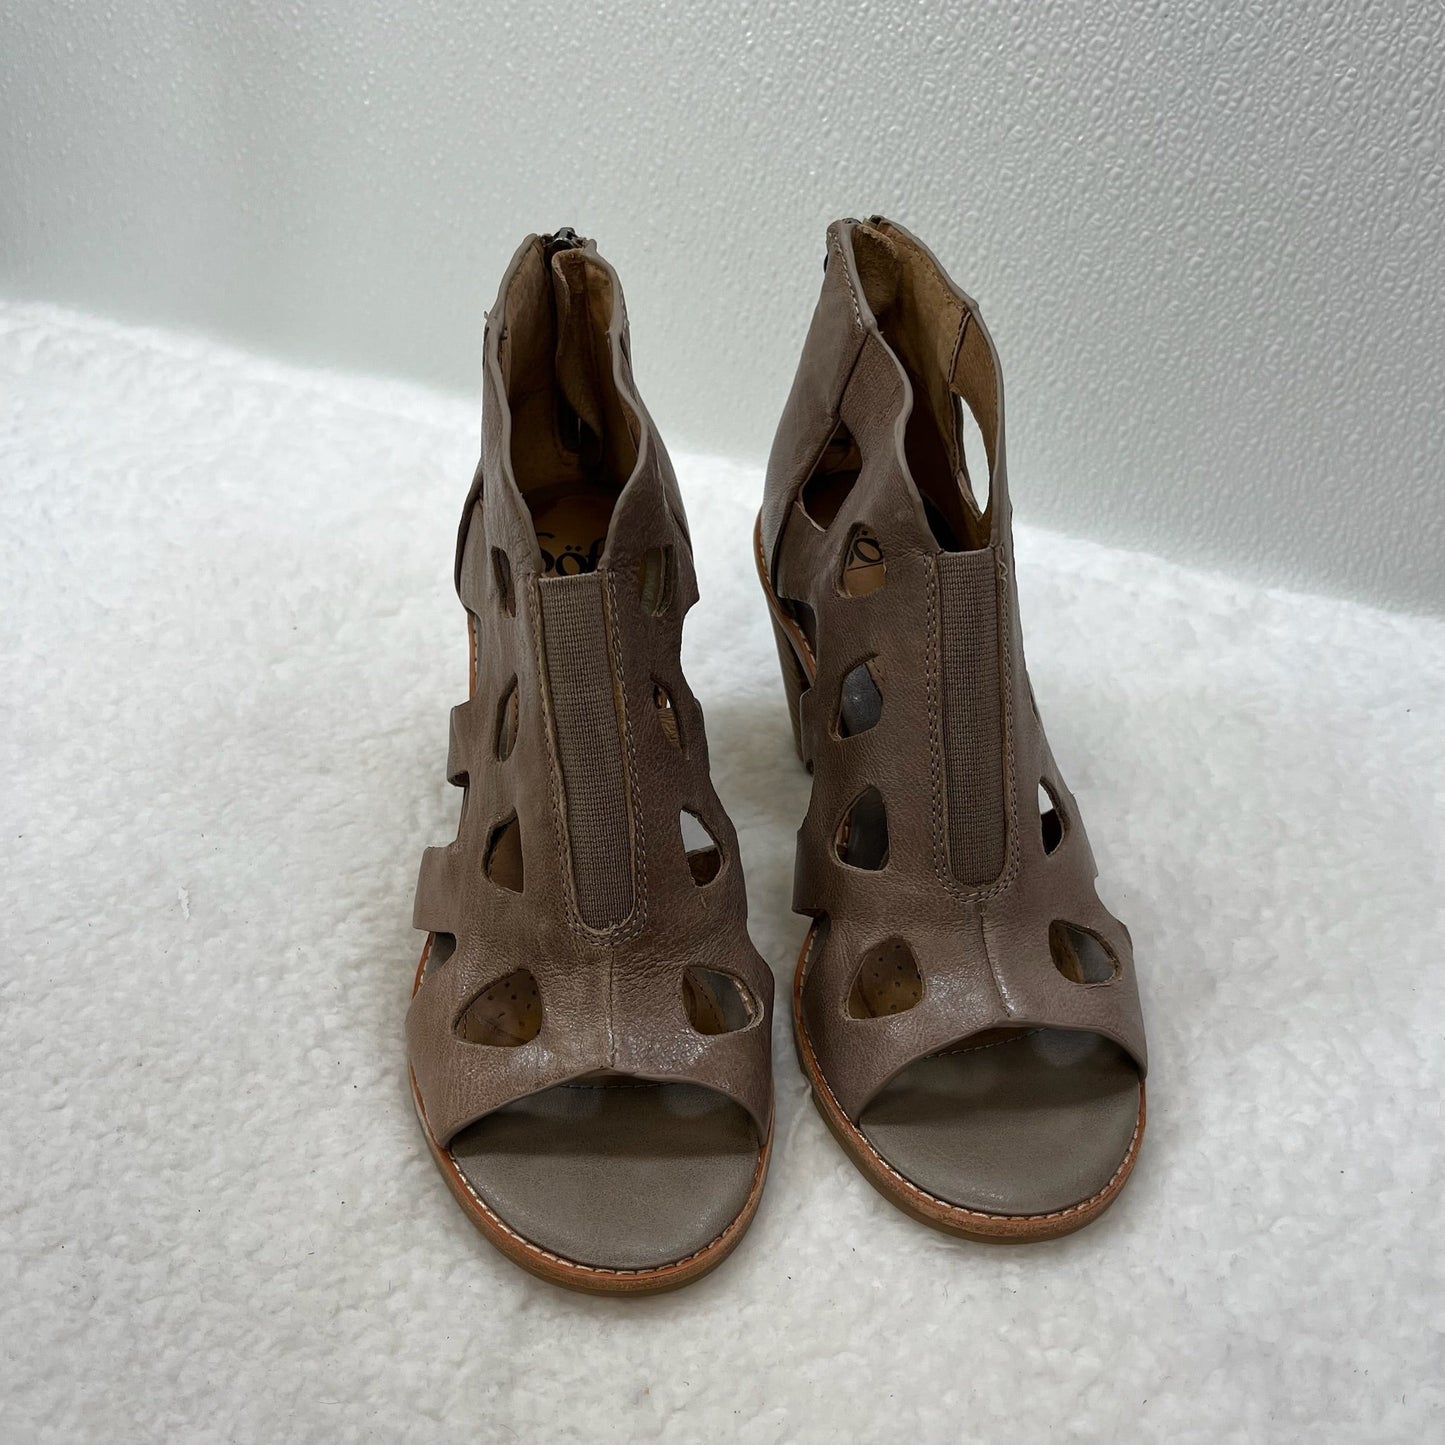 Taupe Shoes Heels Block Sofft, Size 6.5